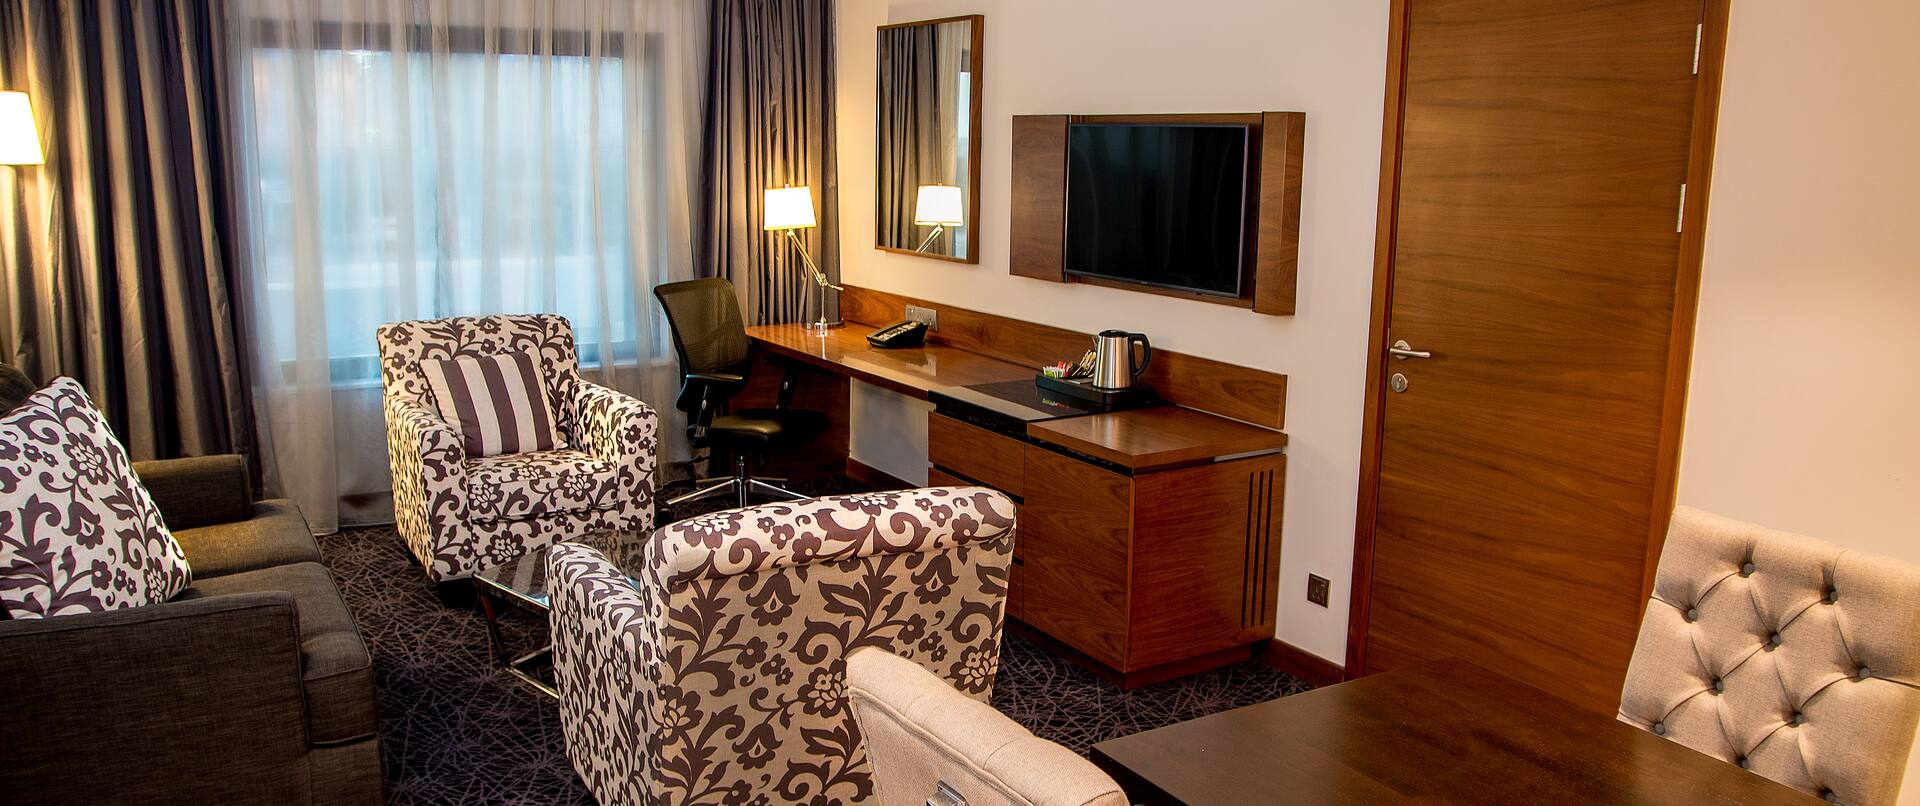 Guest Suite Lounge Area with Armchairs, Sofa, Work Desk and Wall Mounted HDTV